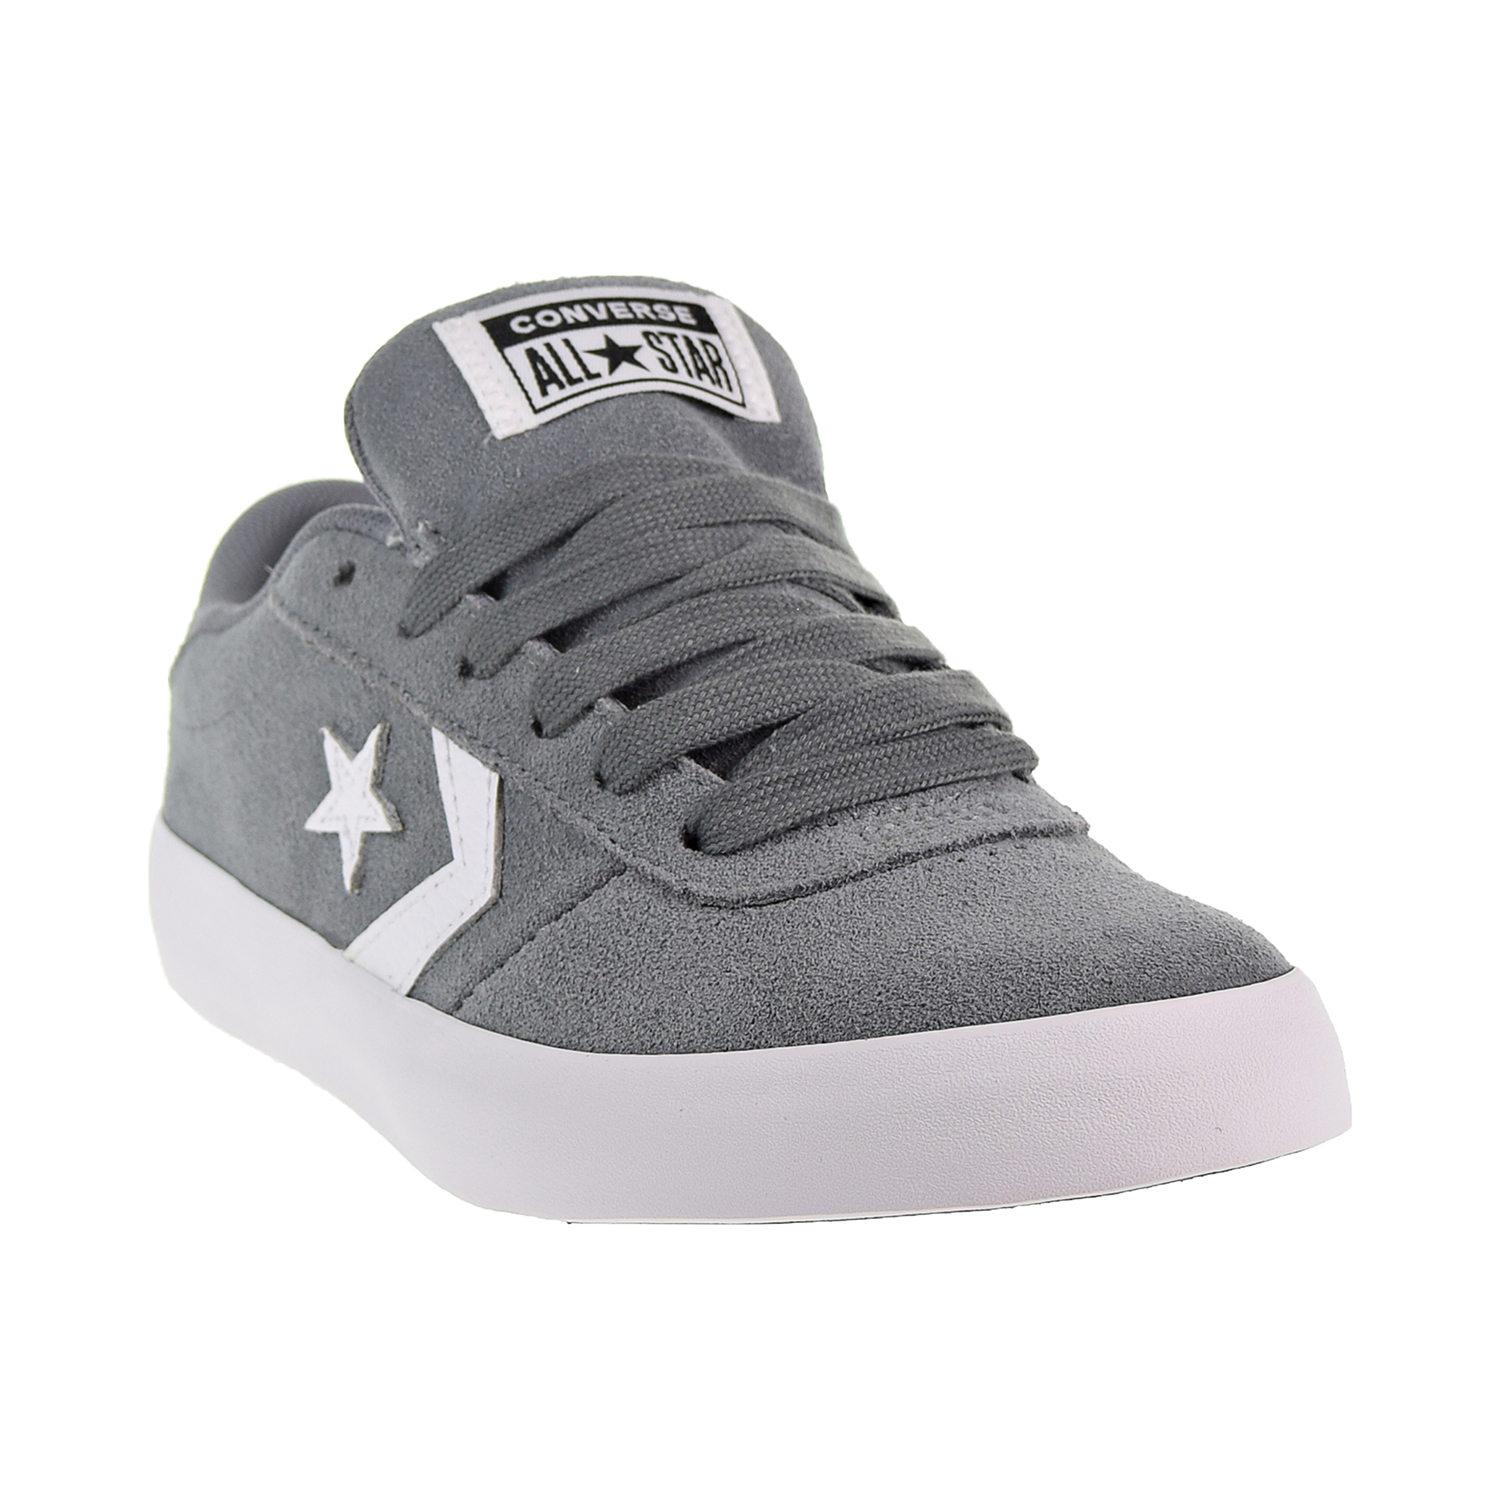 converse grey and white